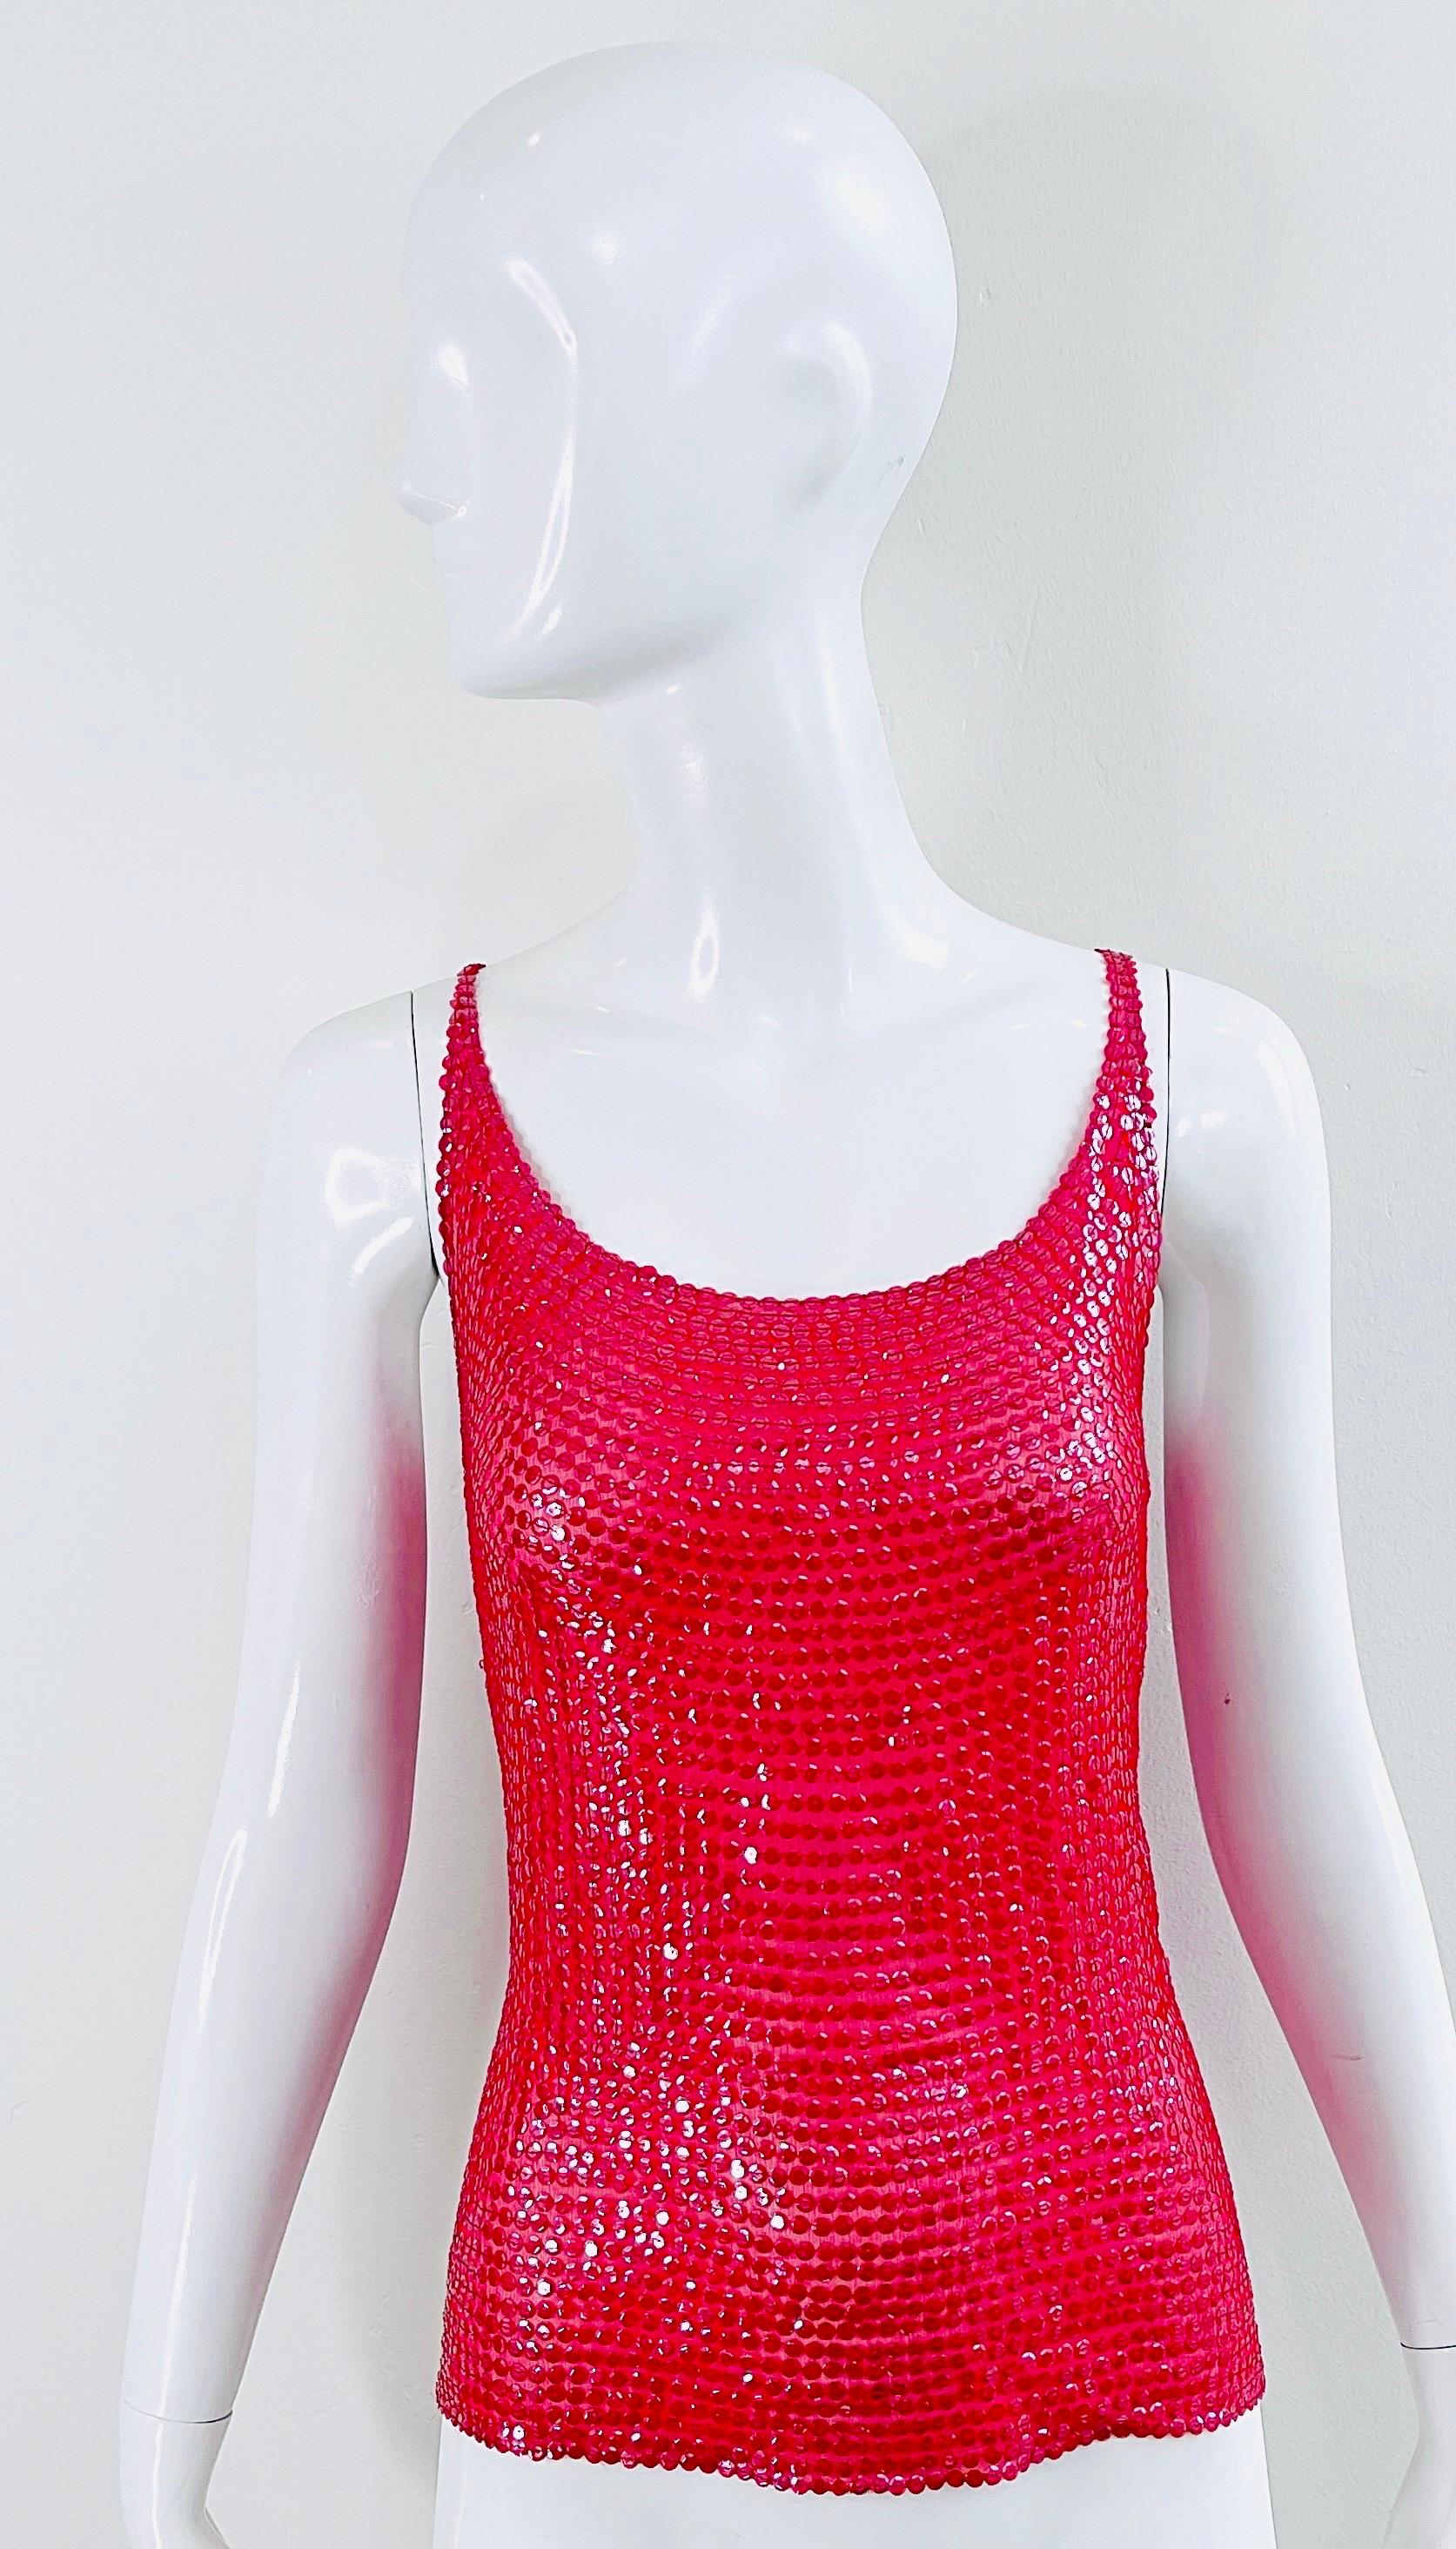 Halston 1970s Lipstick Red Silk Chiffon Fully Sequin Vintage 70s Sleeveless Top For Sale 11